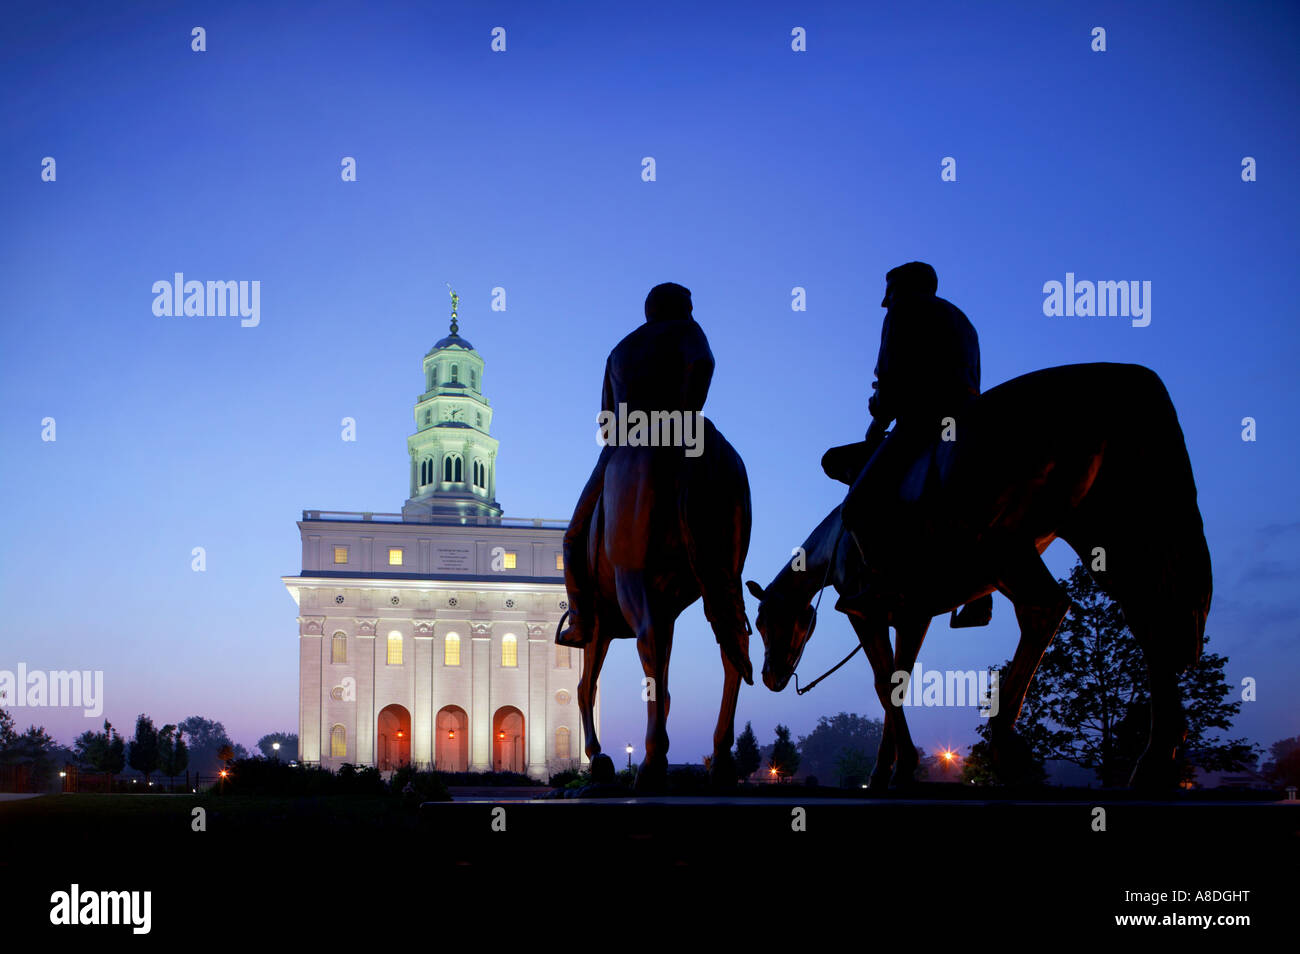 Statue of Joseph and Hyrum Smith on horses in front of Nauvoo Illinois temple Stock Photo